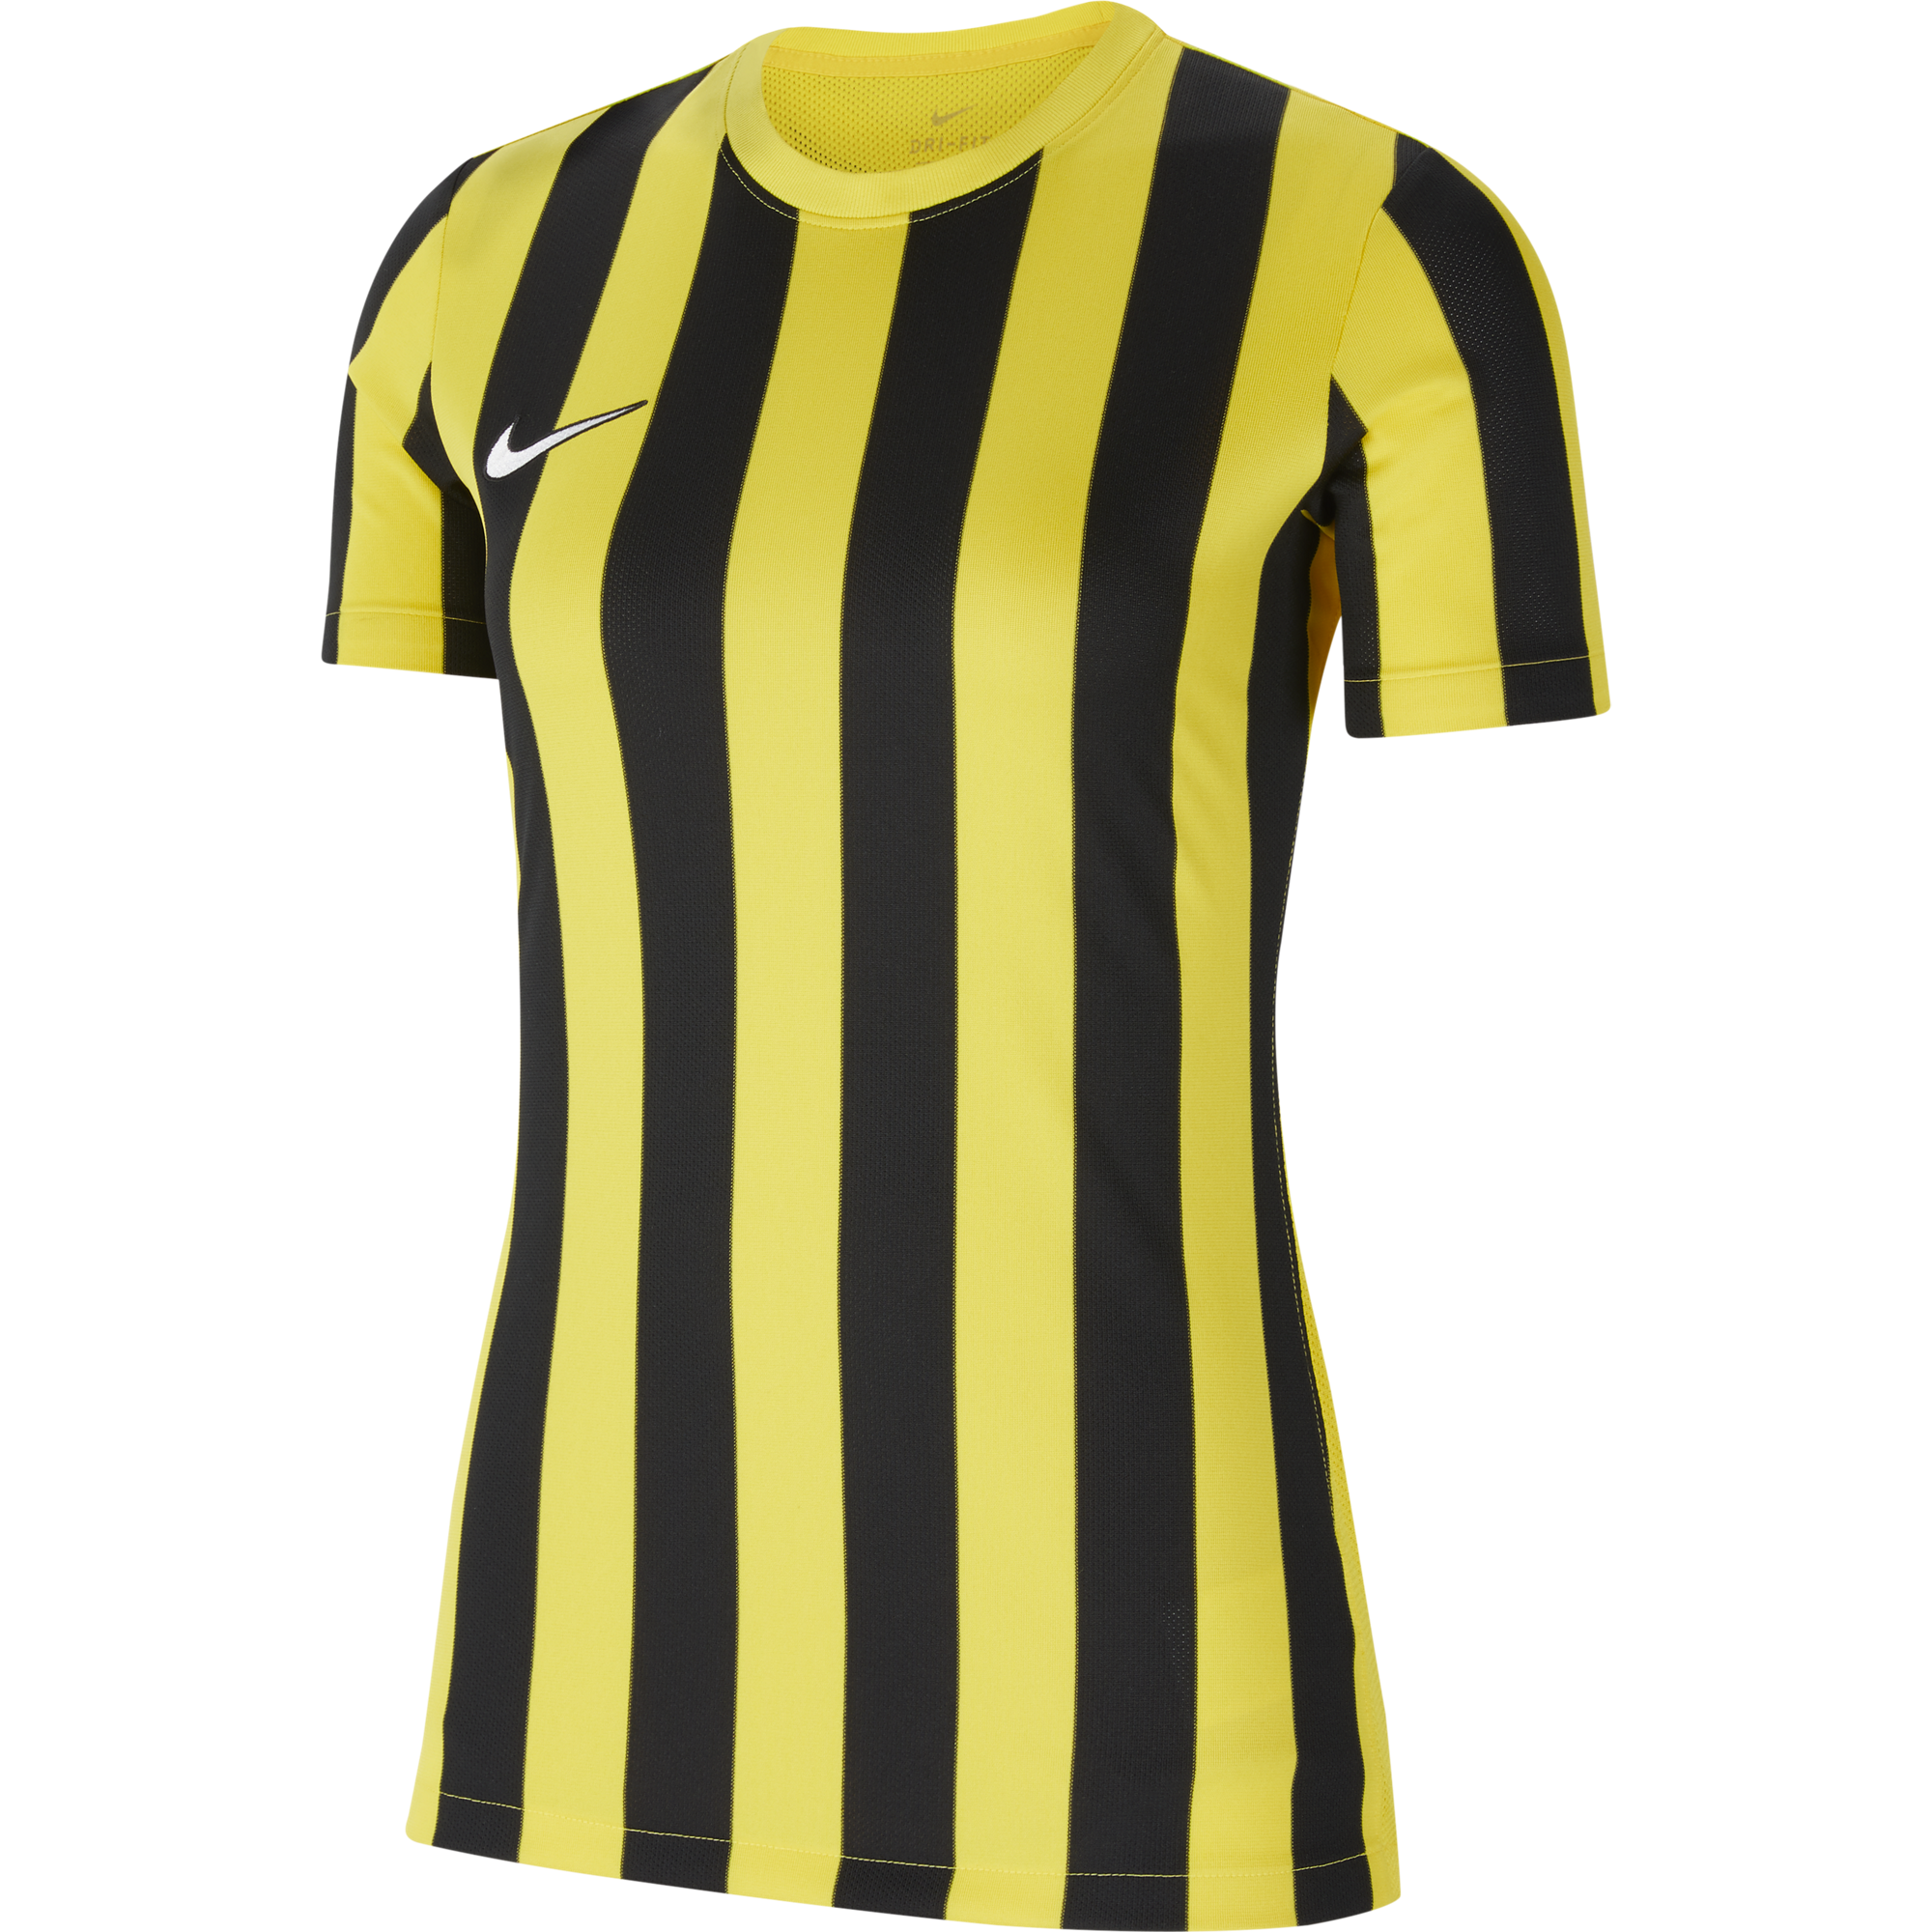 Women's Striped Division IV Jersey S/S